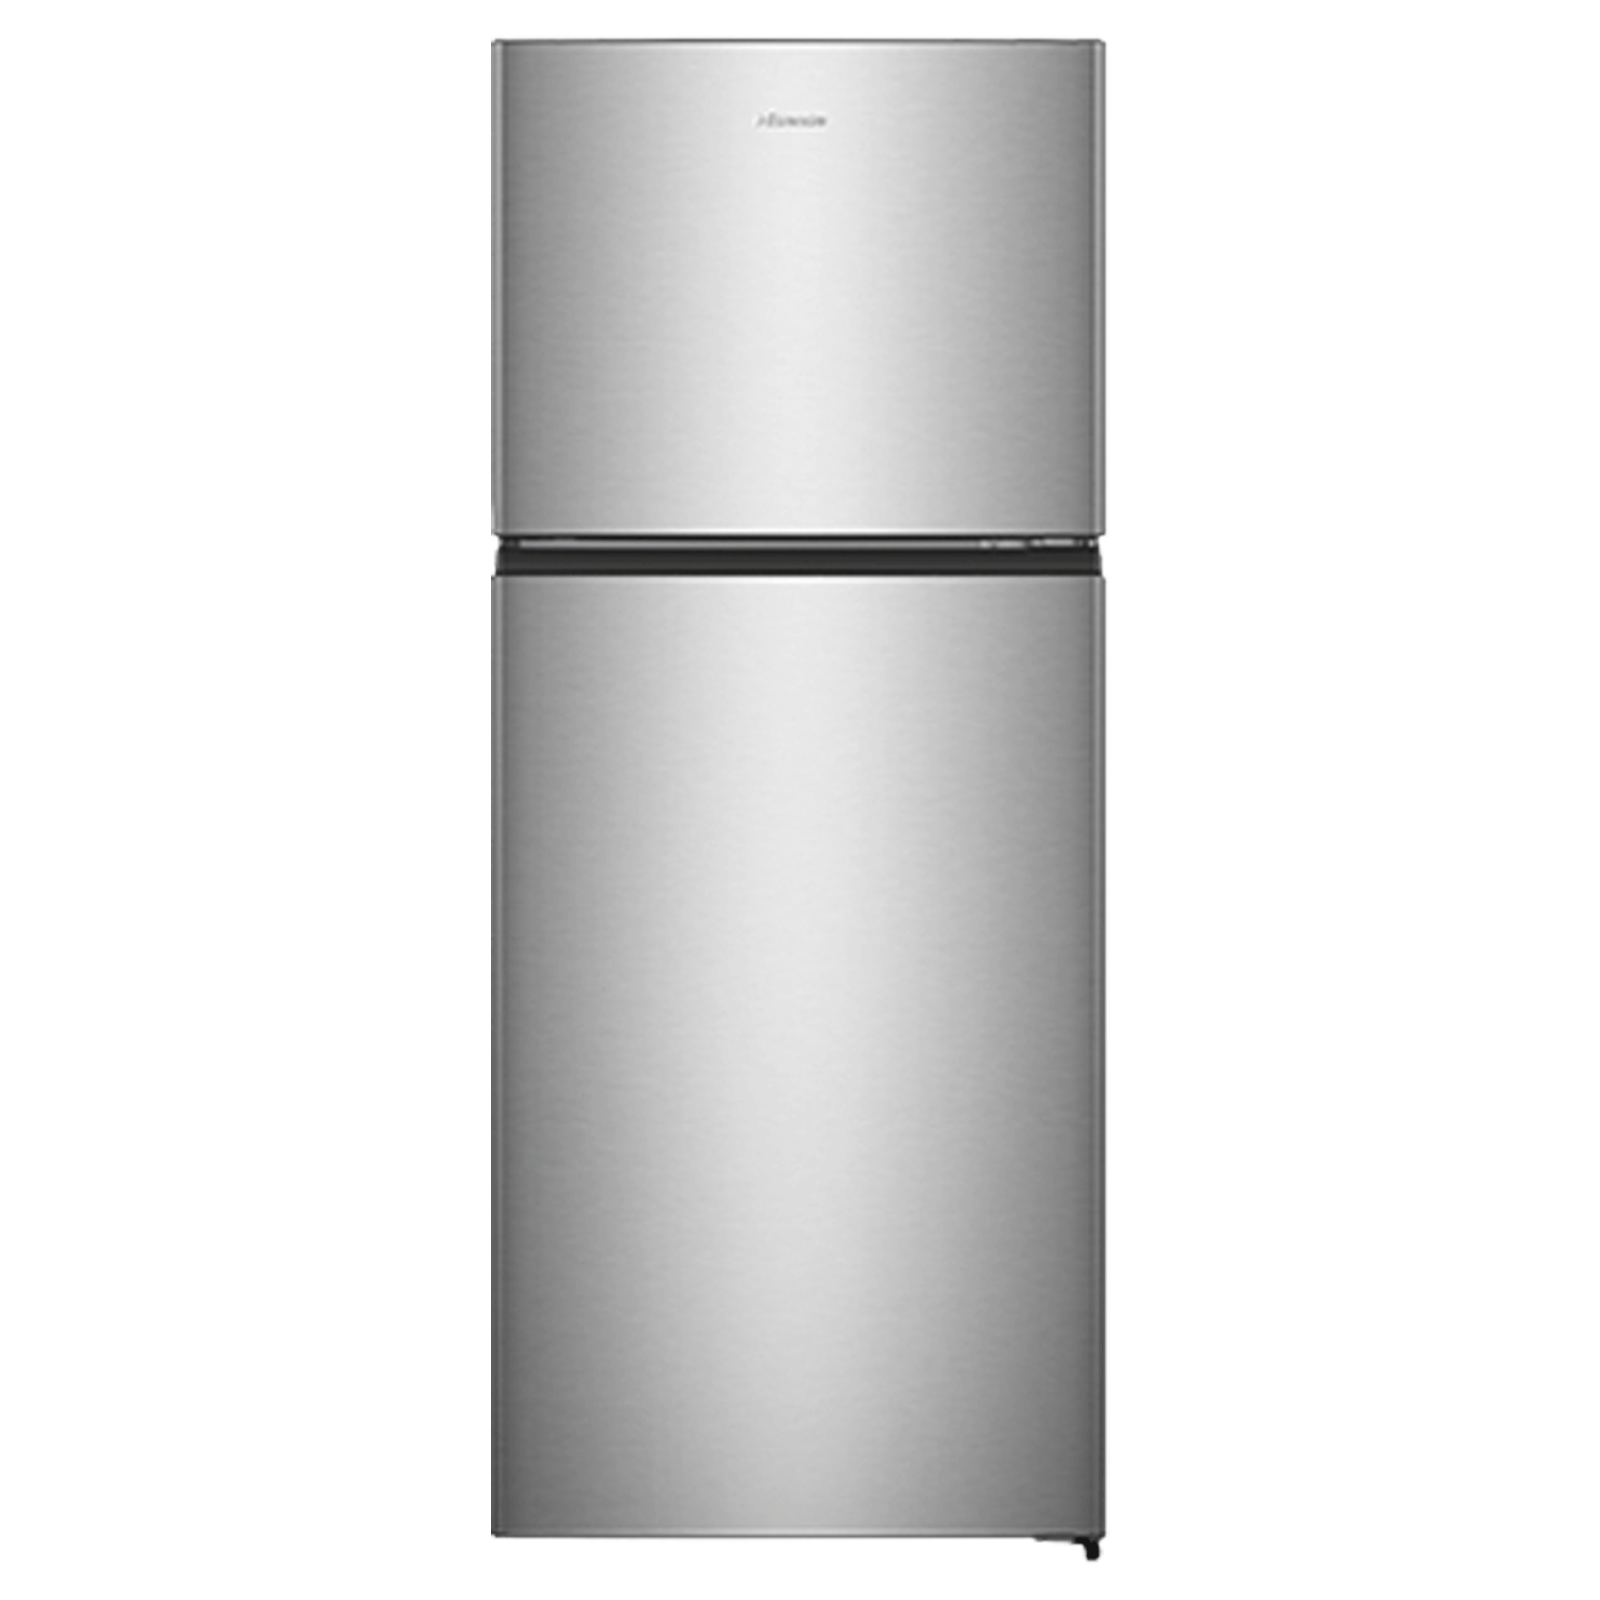 Hisense 411 Litres 2 Star Frost Free Inverter Technology Double Door Refrigerator (Surround Cooling, RT488N4ASB2, Silver)_1